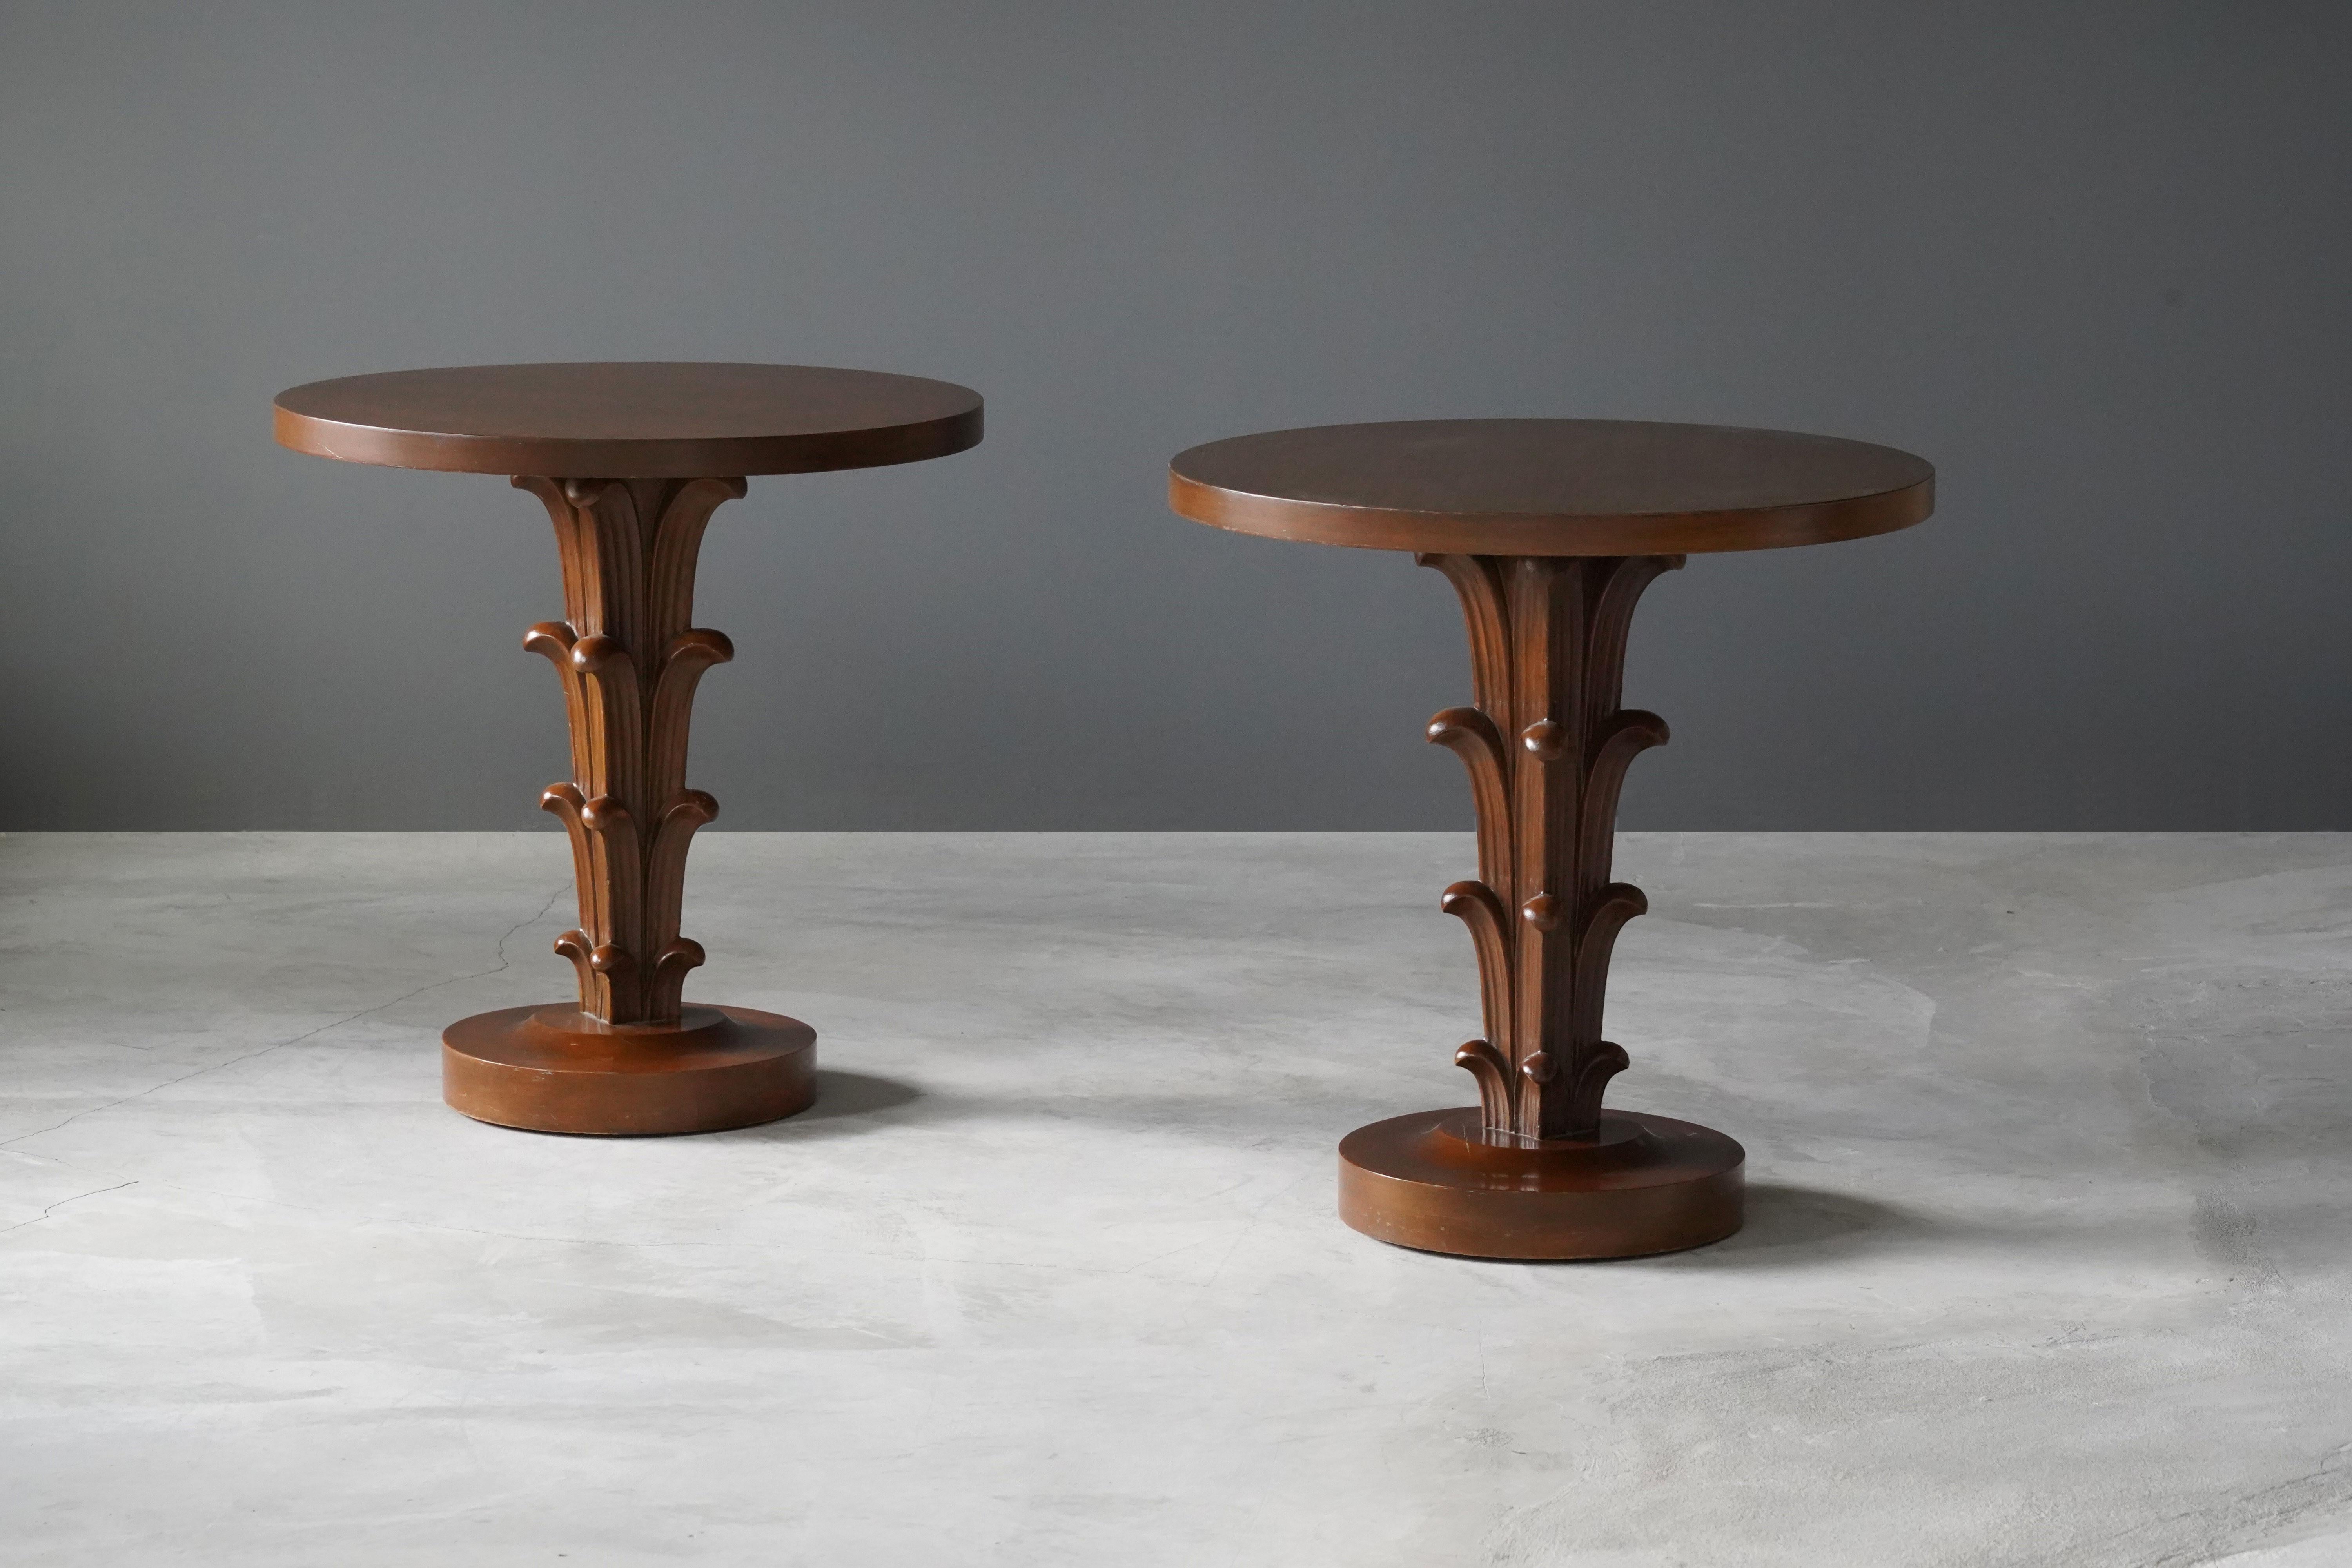 A rare pair of side tables / end tables / occasional tables. Designed by British / American designer T.H. Robsjohn-Gibbings. Produced by Widdicomb Furniture Company, Grand Rapids, Michigan. Bears stencil marking from Widdicomb aswell as retail